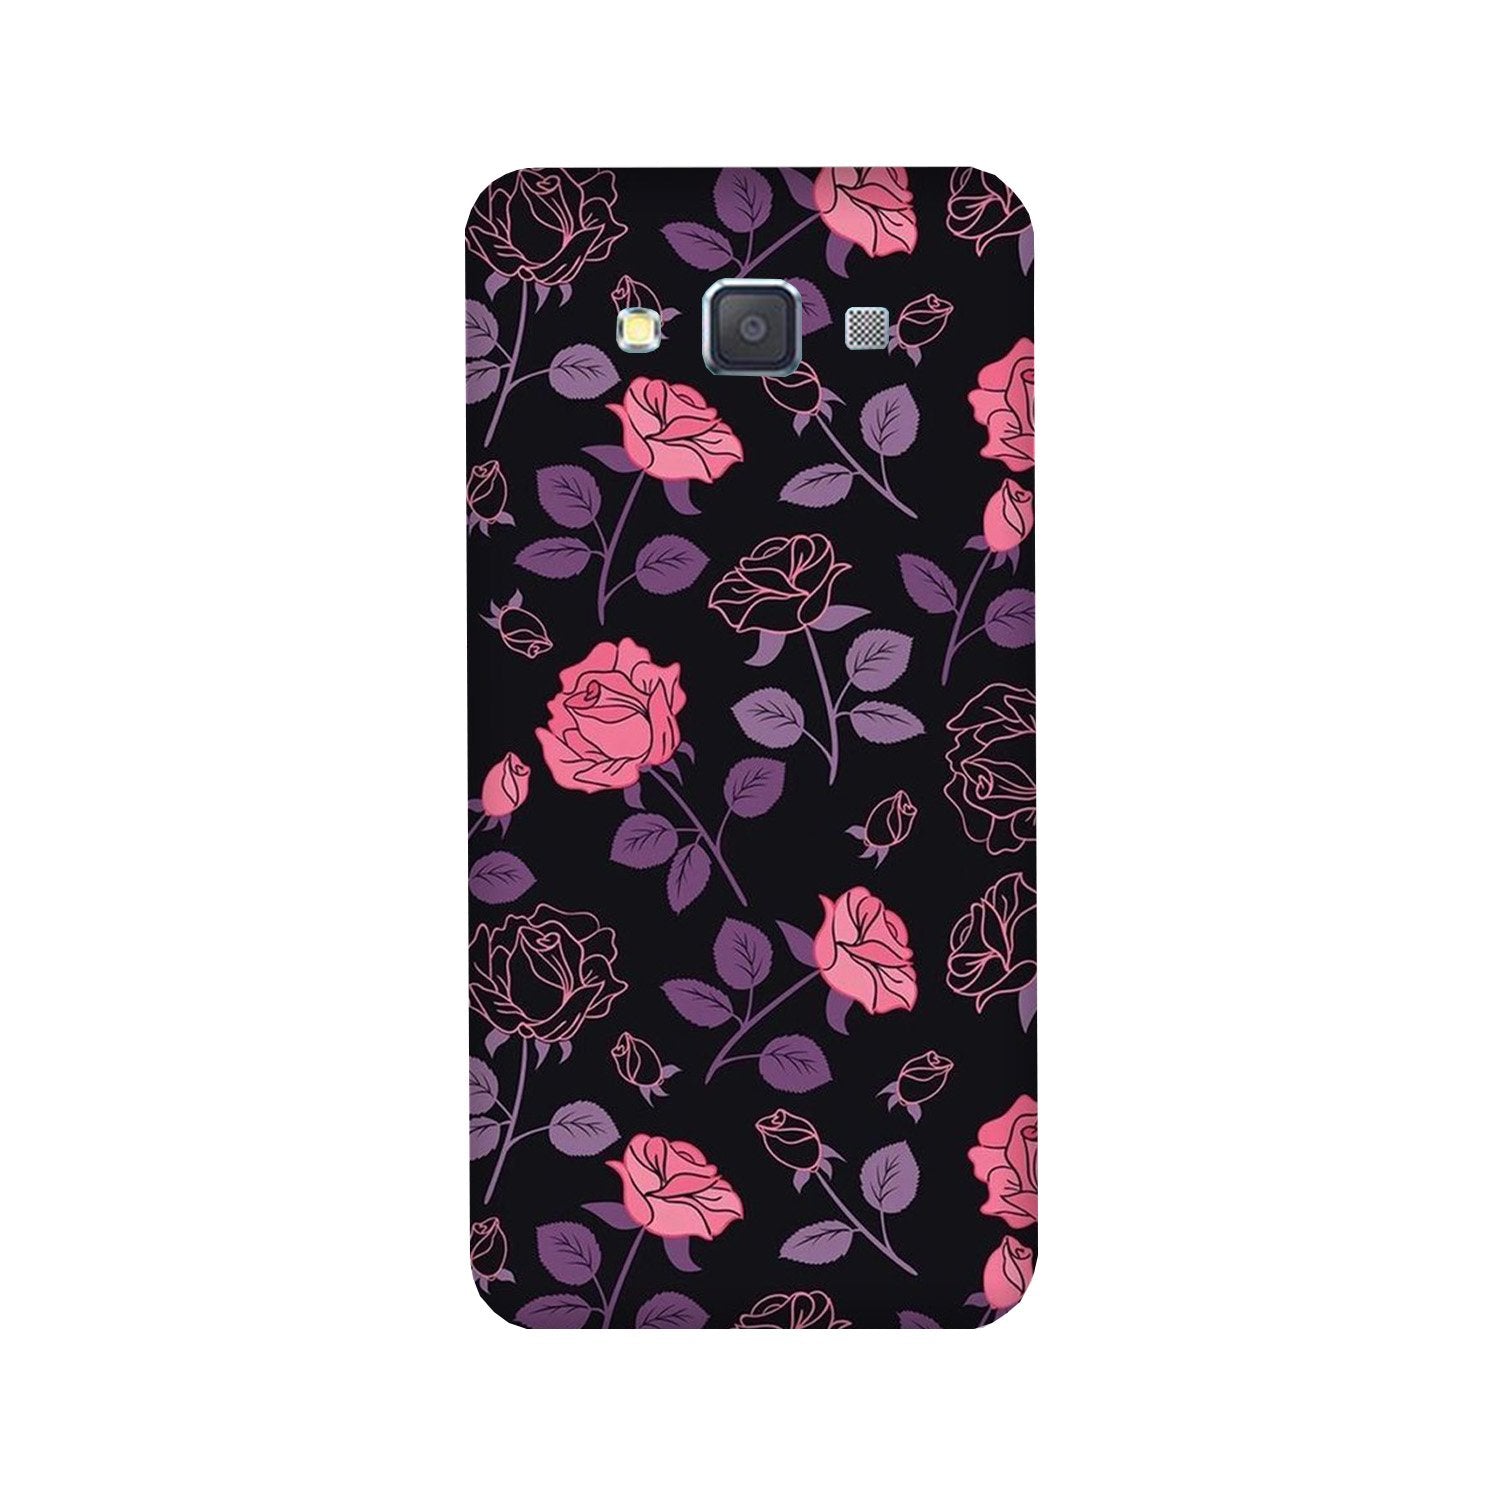 Rose Black Background Case for Galaxy A5 (2015)